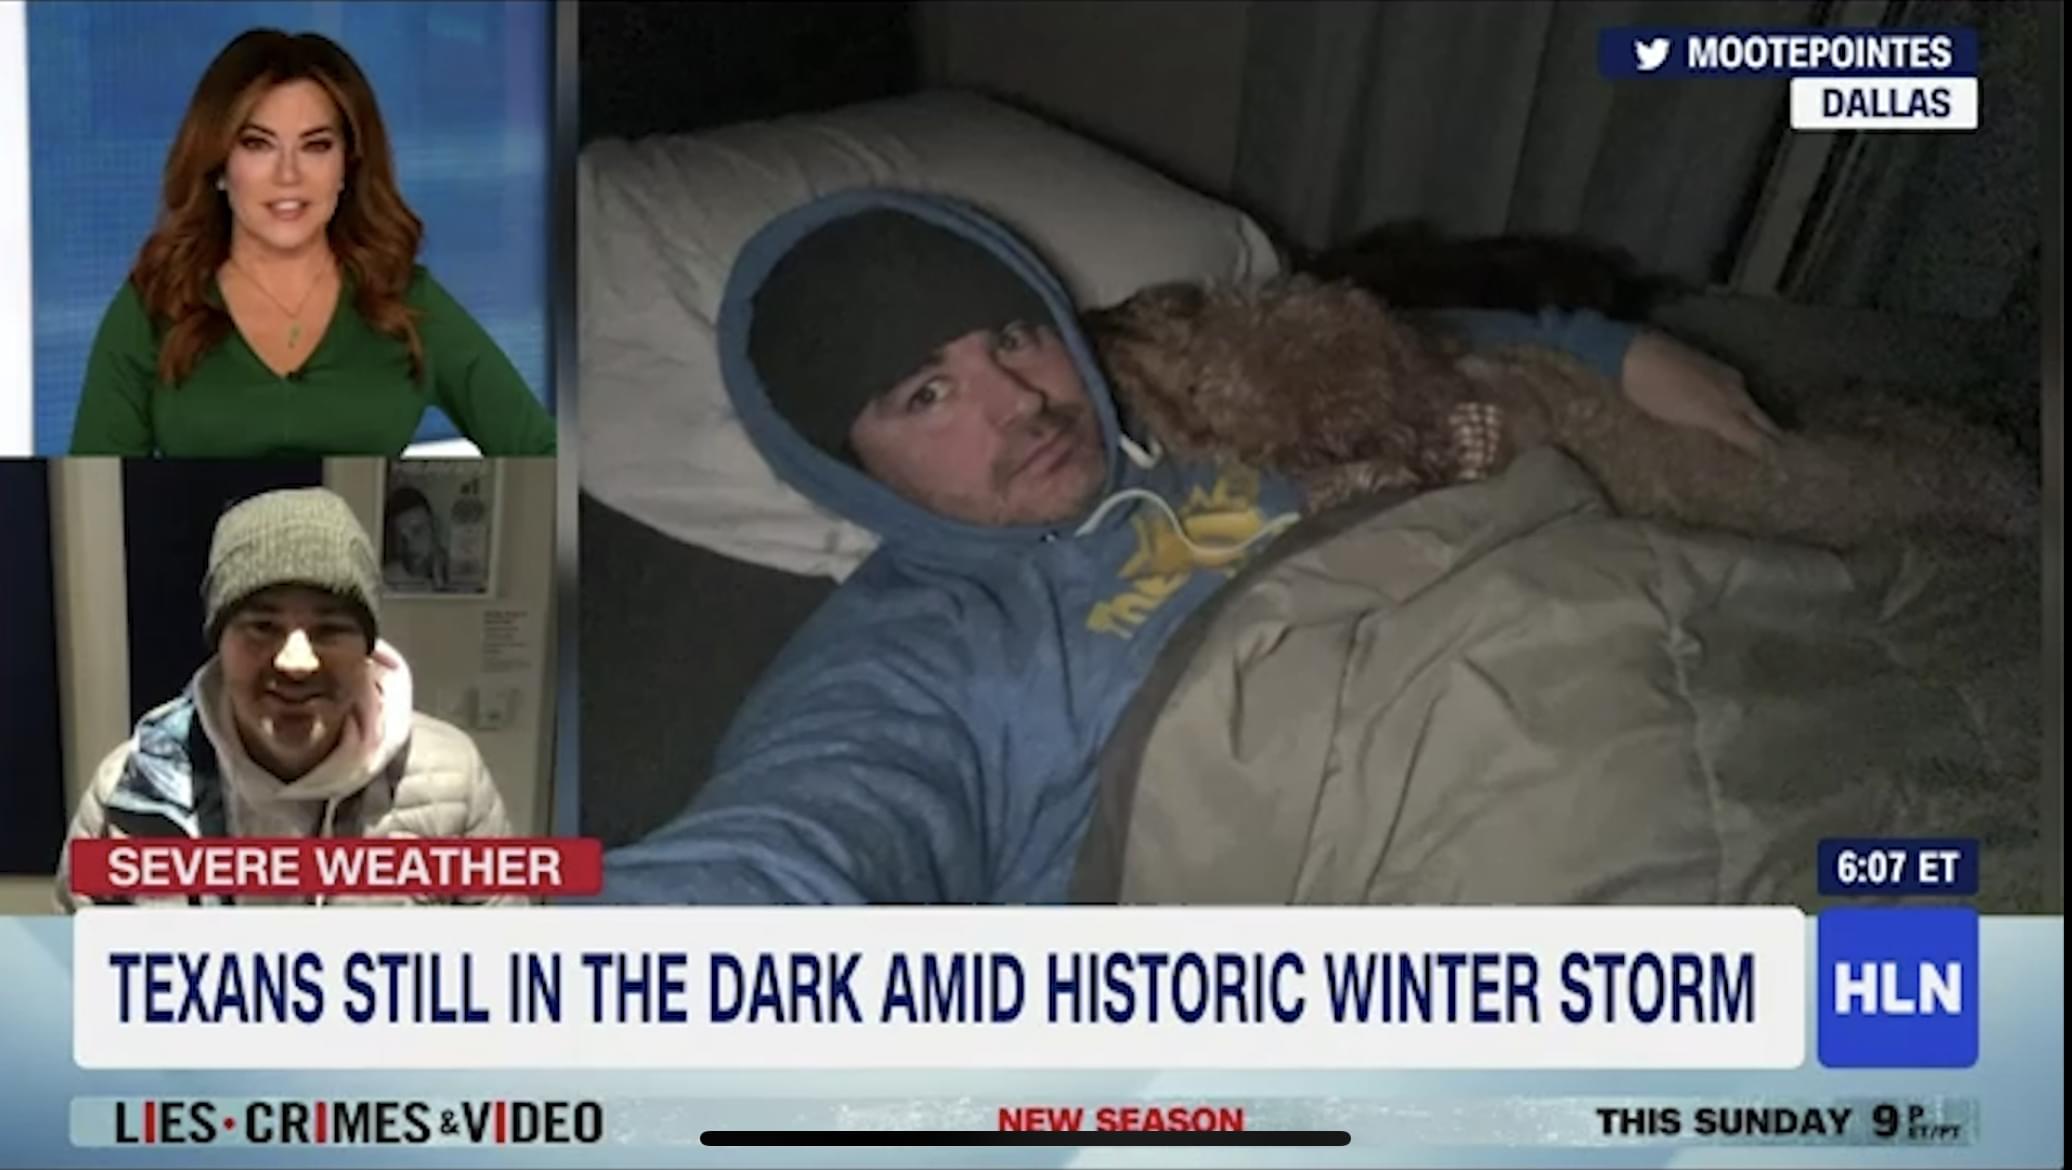 Brian was on HLN Talking about the DFW Blackout